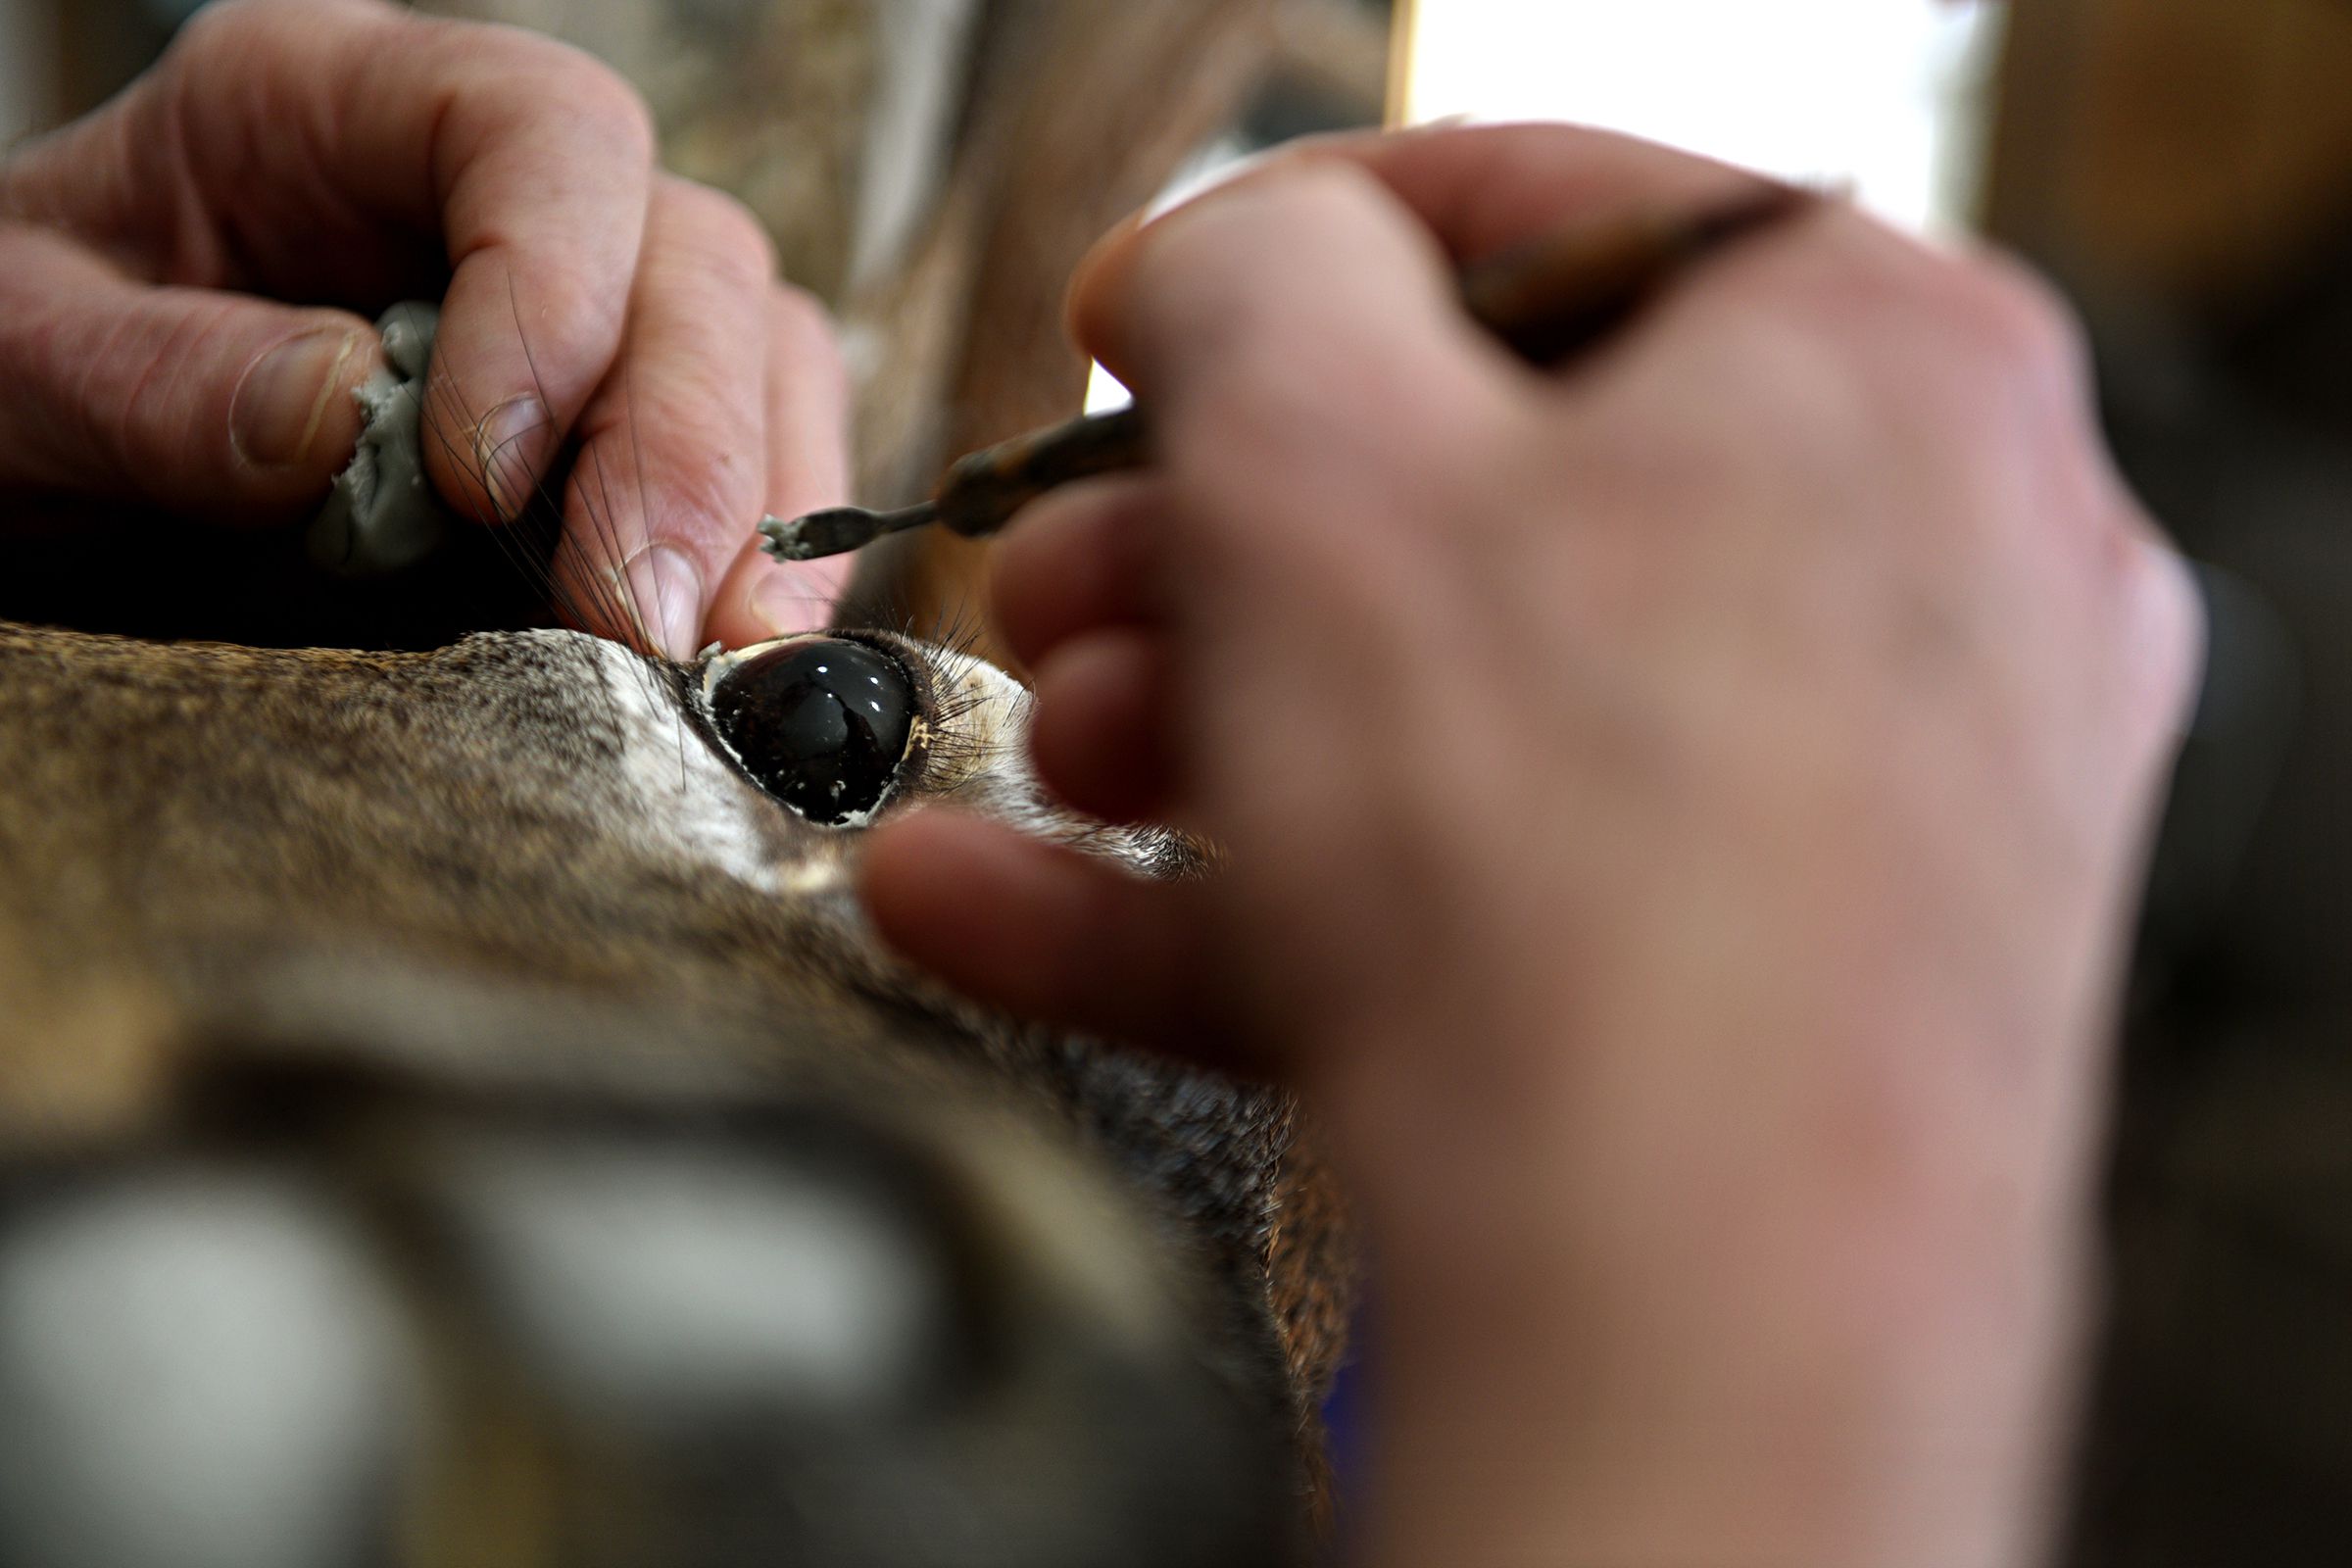 John Matyka owner of Jacobs Brook Taxidermy applies modeling compound clay used for bonding and filling around the glass eye of a buck he has mounted at his shop in Orford, N.H., on Wednesday, April 3, 2019. (Valley News - Jennifer Hauck) Copyright Valley News. May not be reprinted or used online without permission. Send requests to permission@vnews.com.